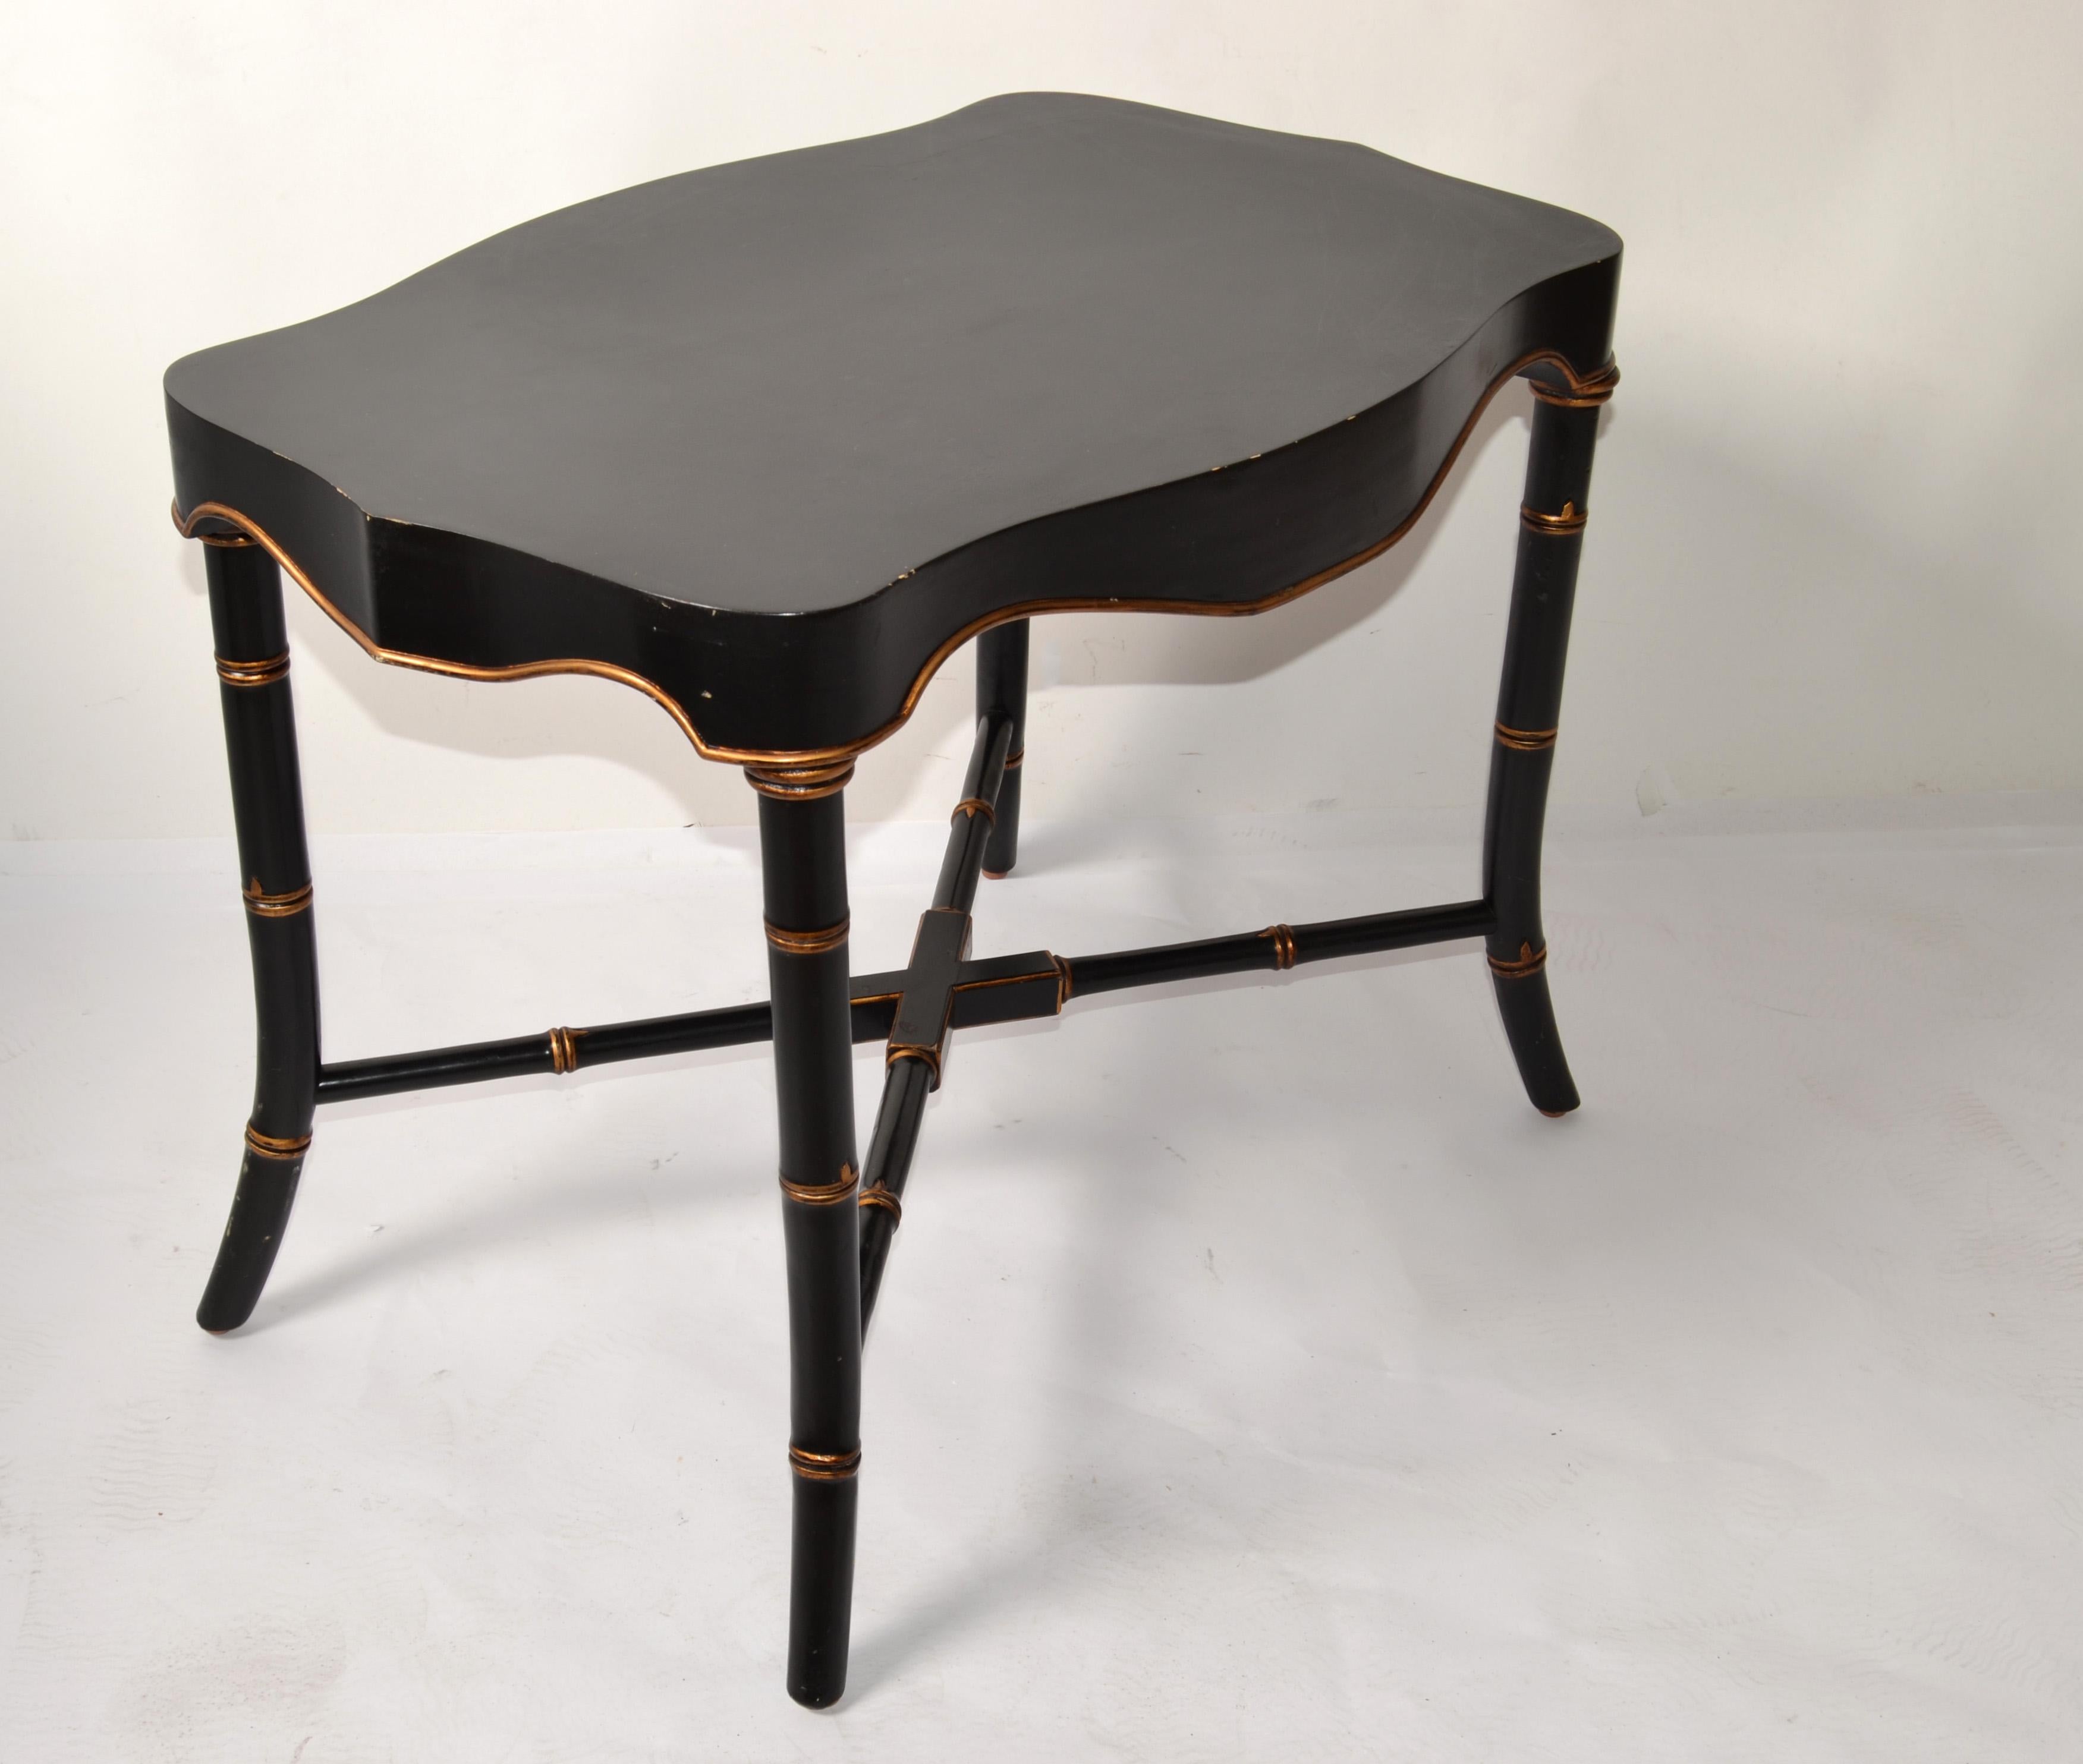 Mid 20th Century Victorian Style Black and Gold Finish Chinoiserie inspired Accent Table.
Featuring a rectangle carved Top with Apron and having four faux bamboo legs and cross stretchers. 
The slender Design is great for Side, End or Drink Table